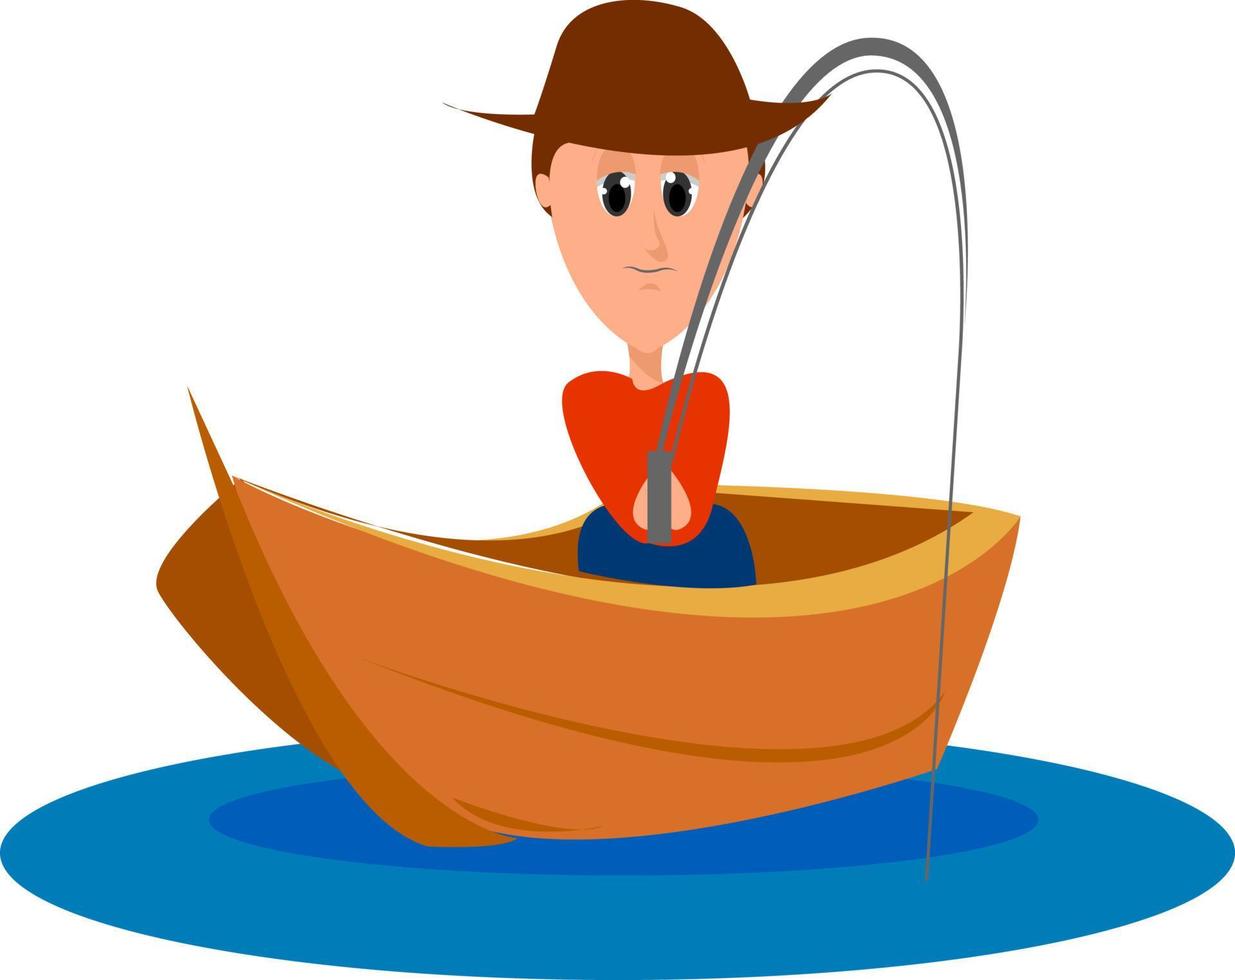 Man in a boat, illustration, vector on white background.